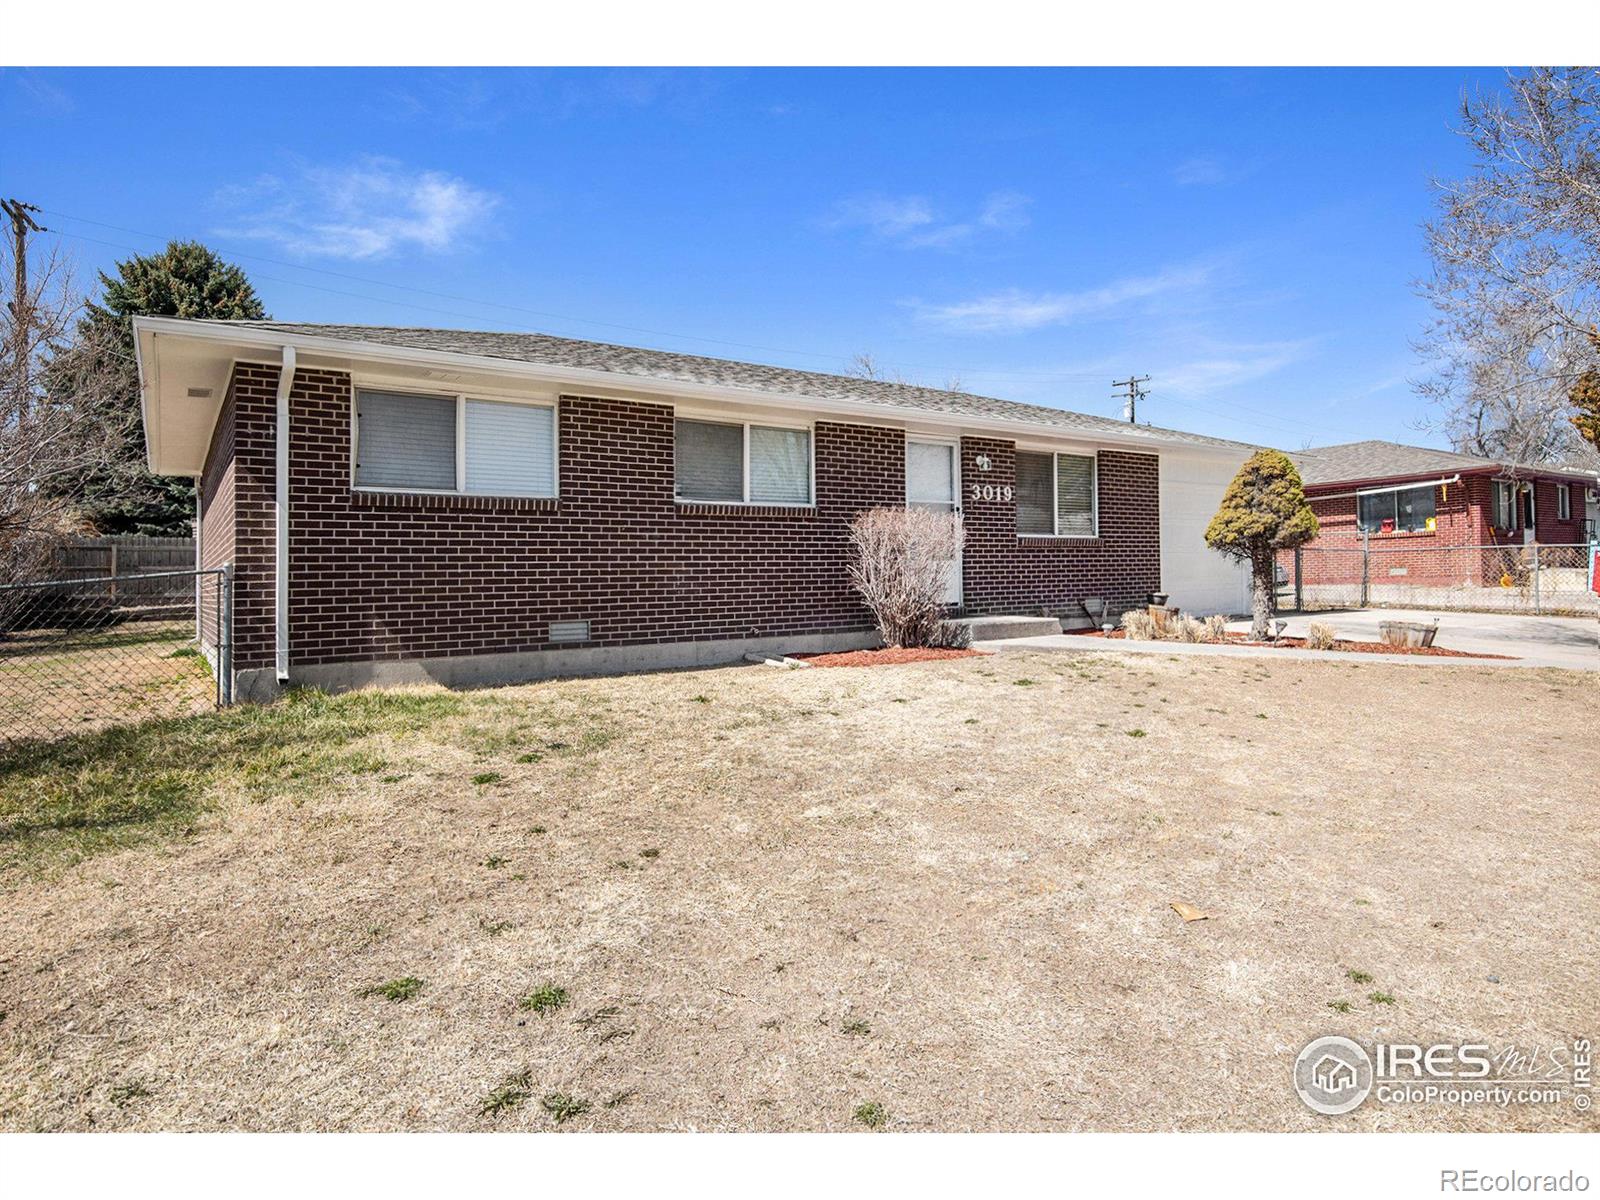 Report Image for 3019  Lakeside Drive,Evans, Colorado